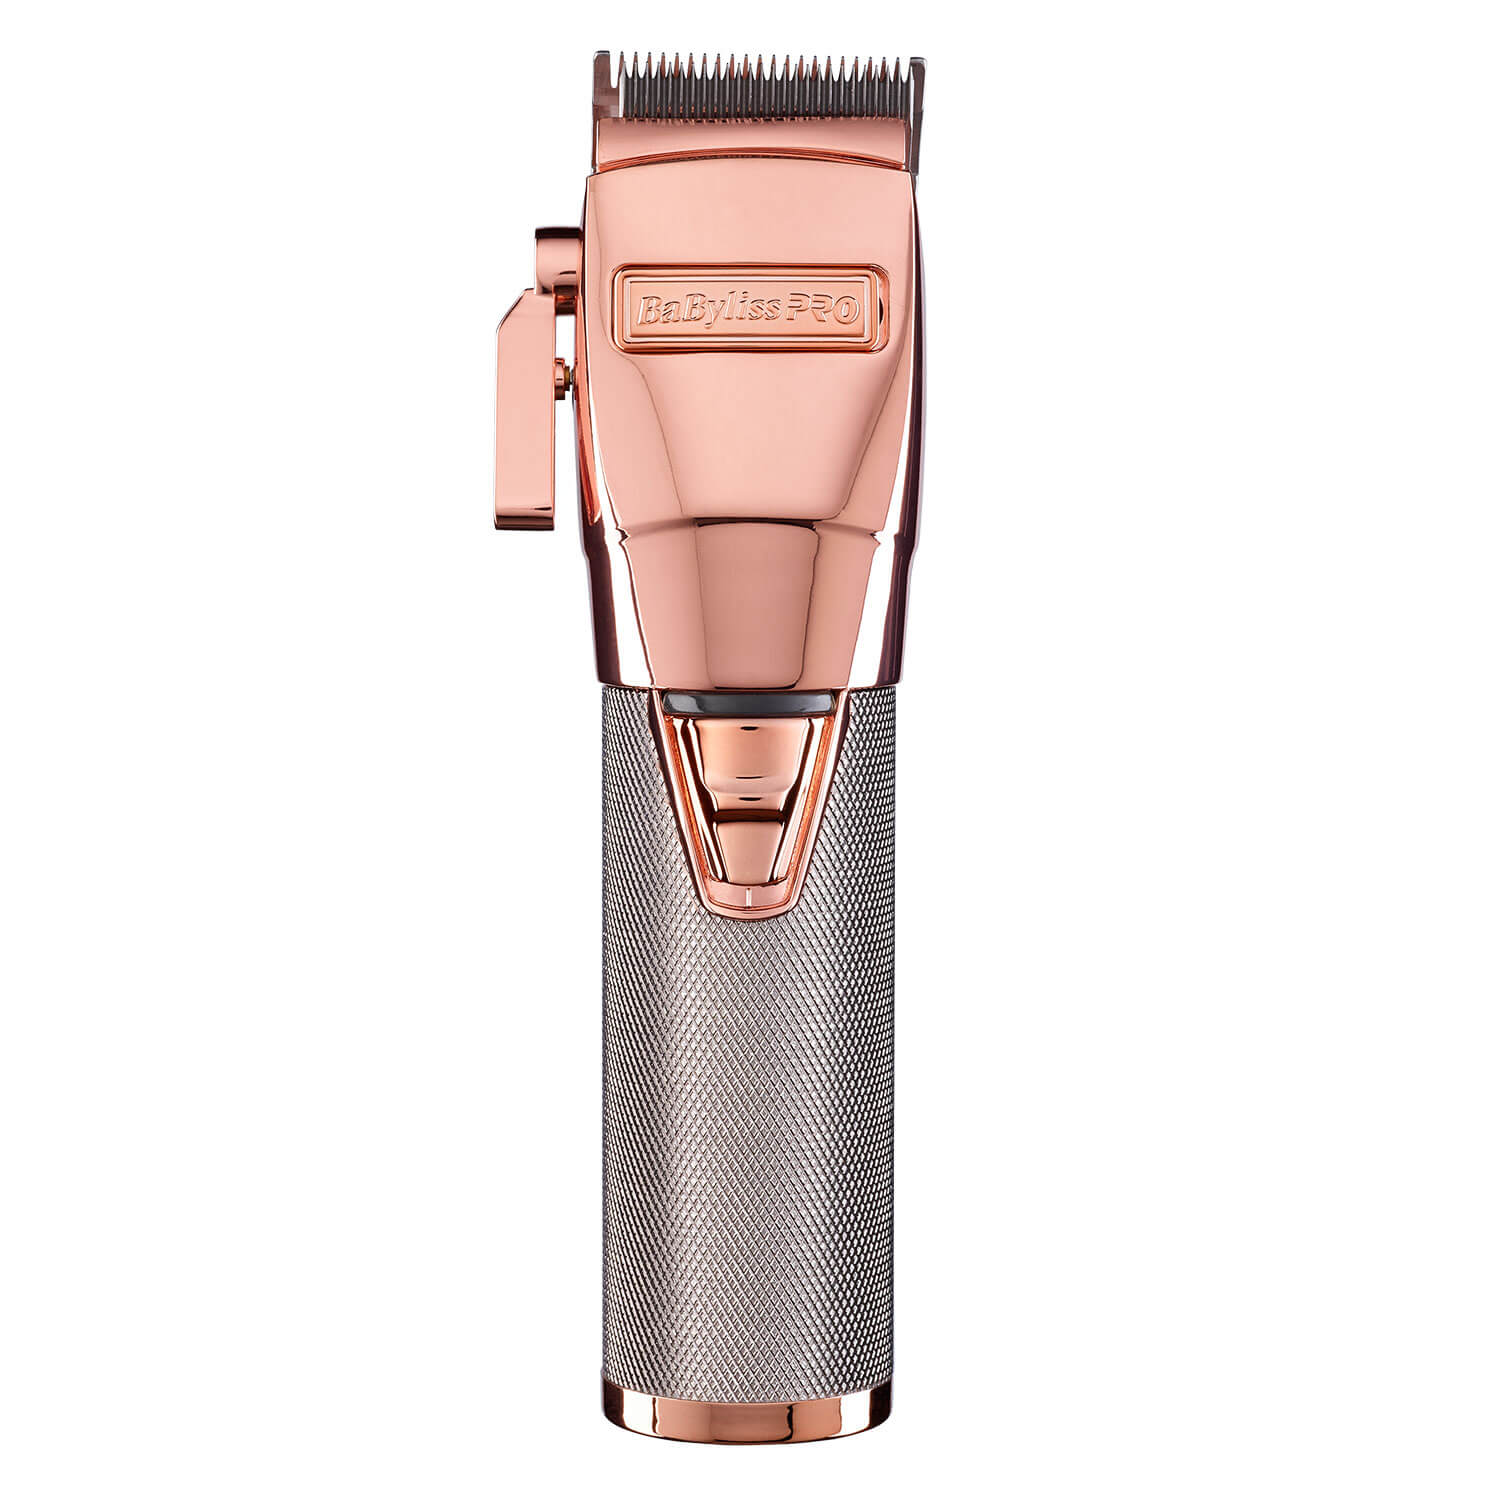 rose gold hair clippers